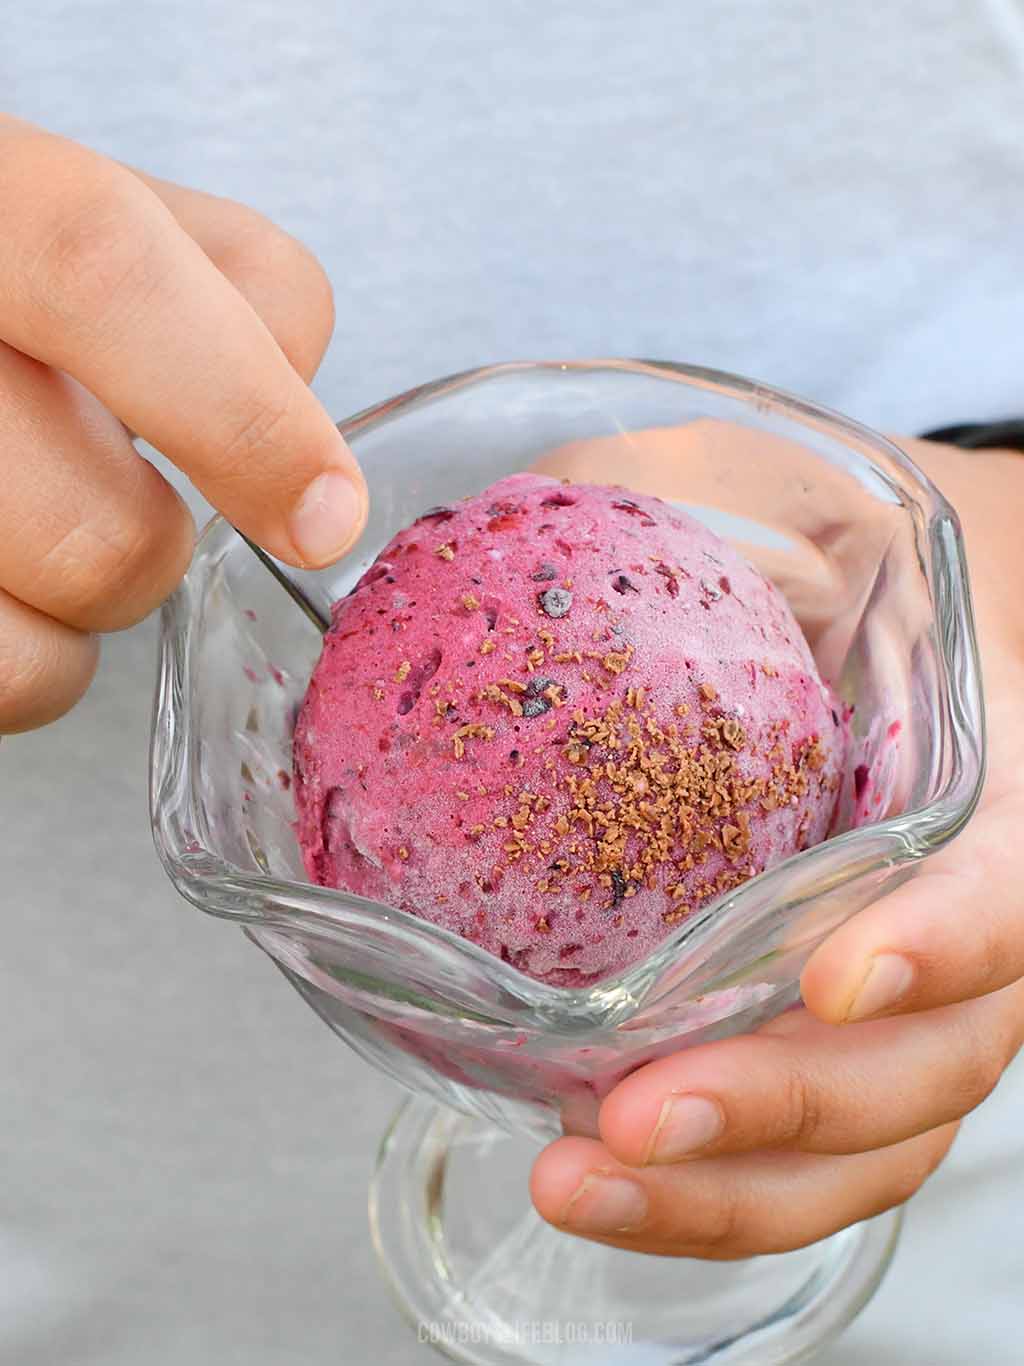 Child holdingmixed berry ice cream topping with chocolate shavings in a glass bowl